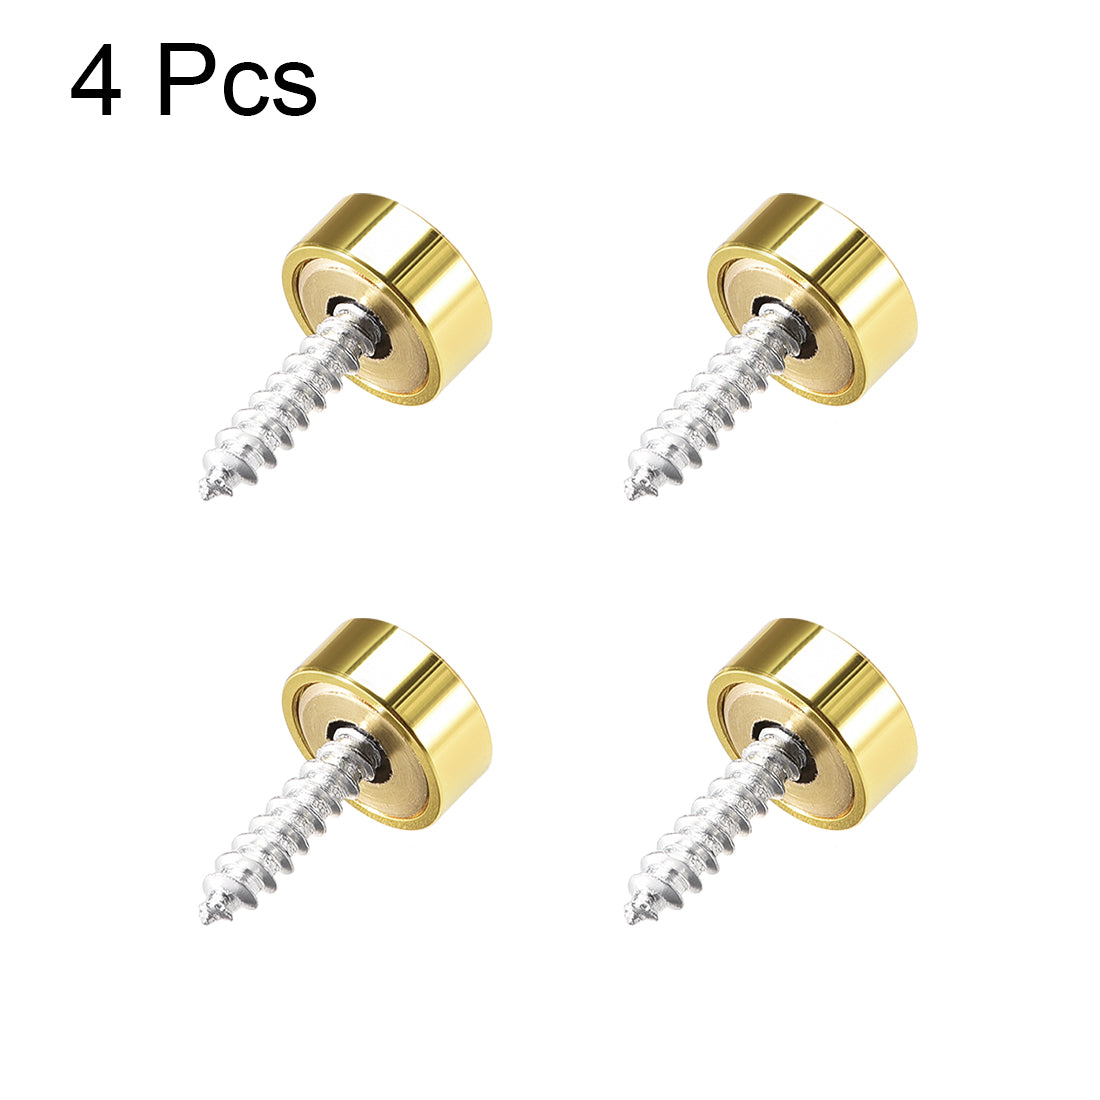 uxcell Uxcell Mirror Screws, Decorative Cap Fasteners Cover Nails, Electroplated, Bright Golden 12mm/0.47" Brass 4pcs